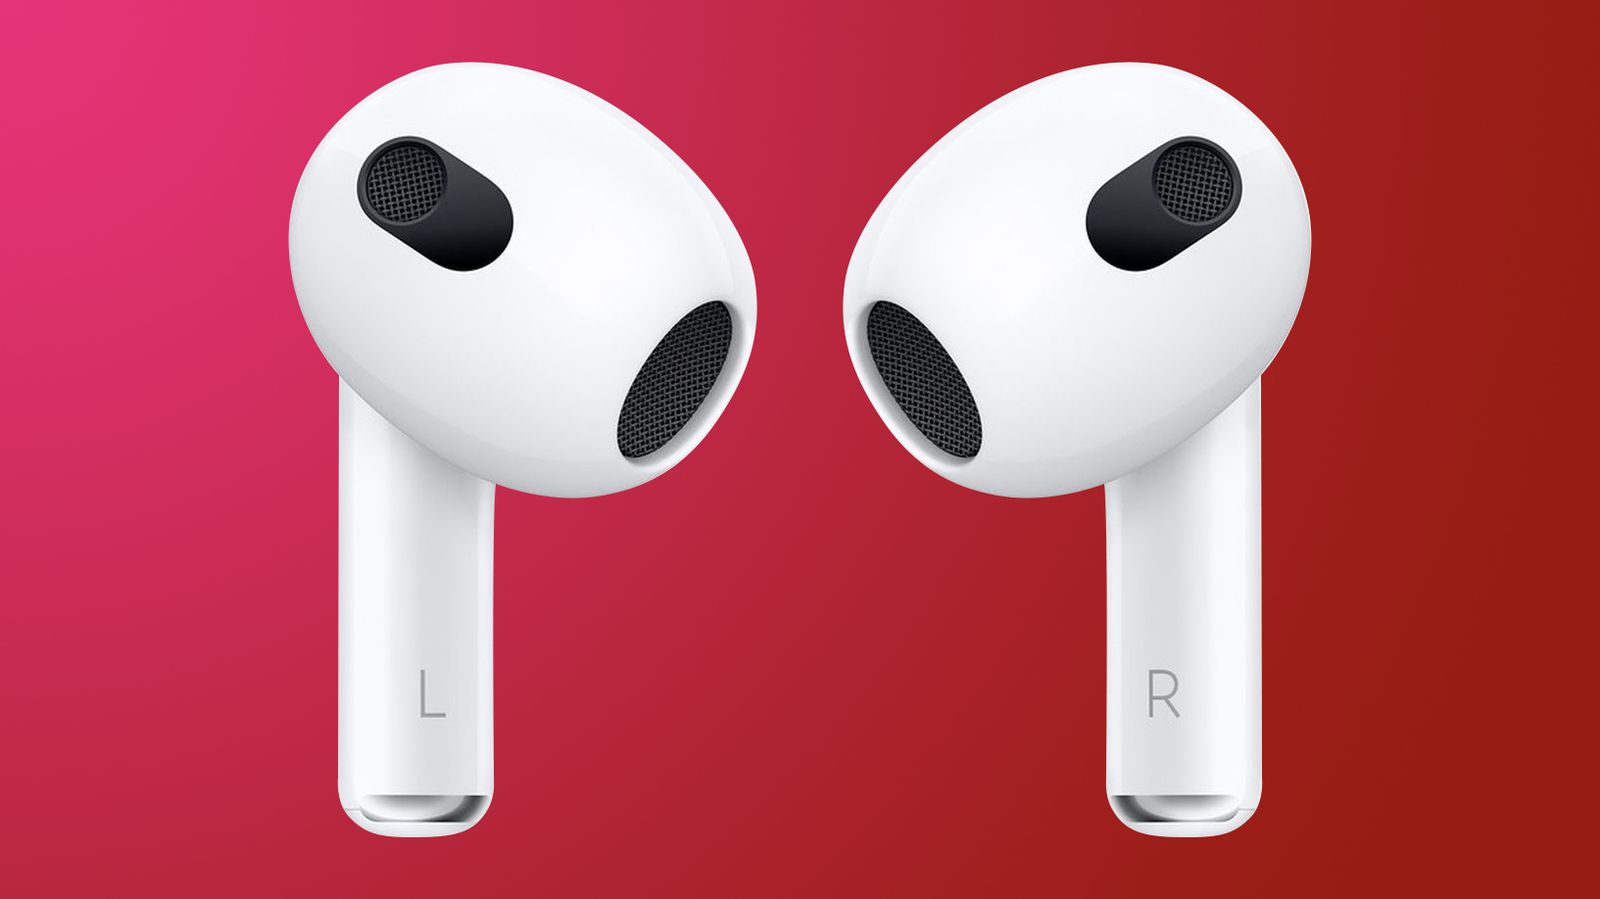 White 3rd Generation Apple Airpod, Model Name/Number: Airpods 3